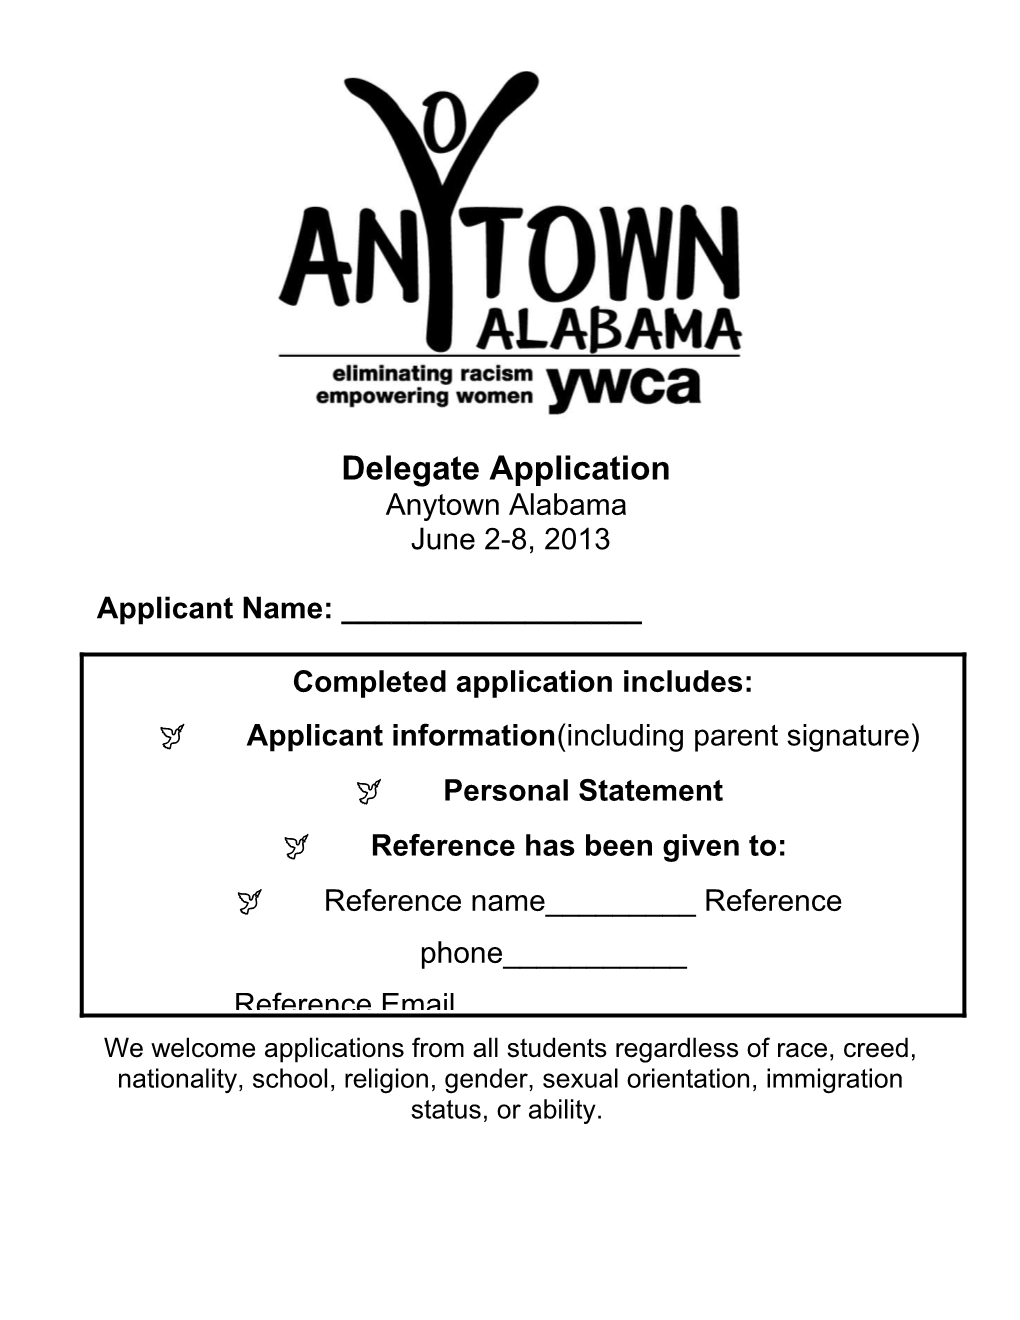 ANYTOWN ALABAMA for Office Use Only